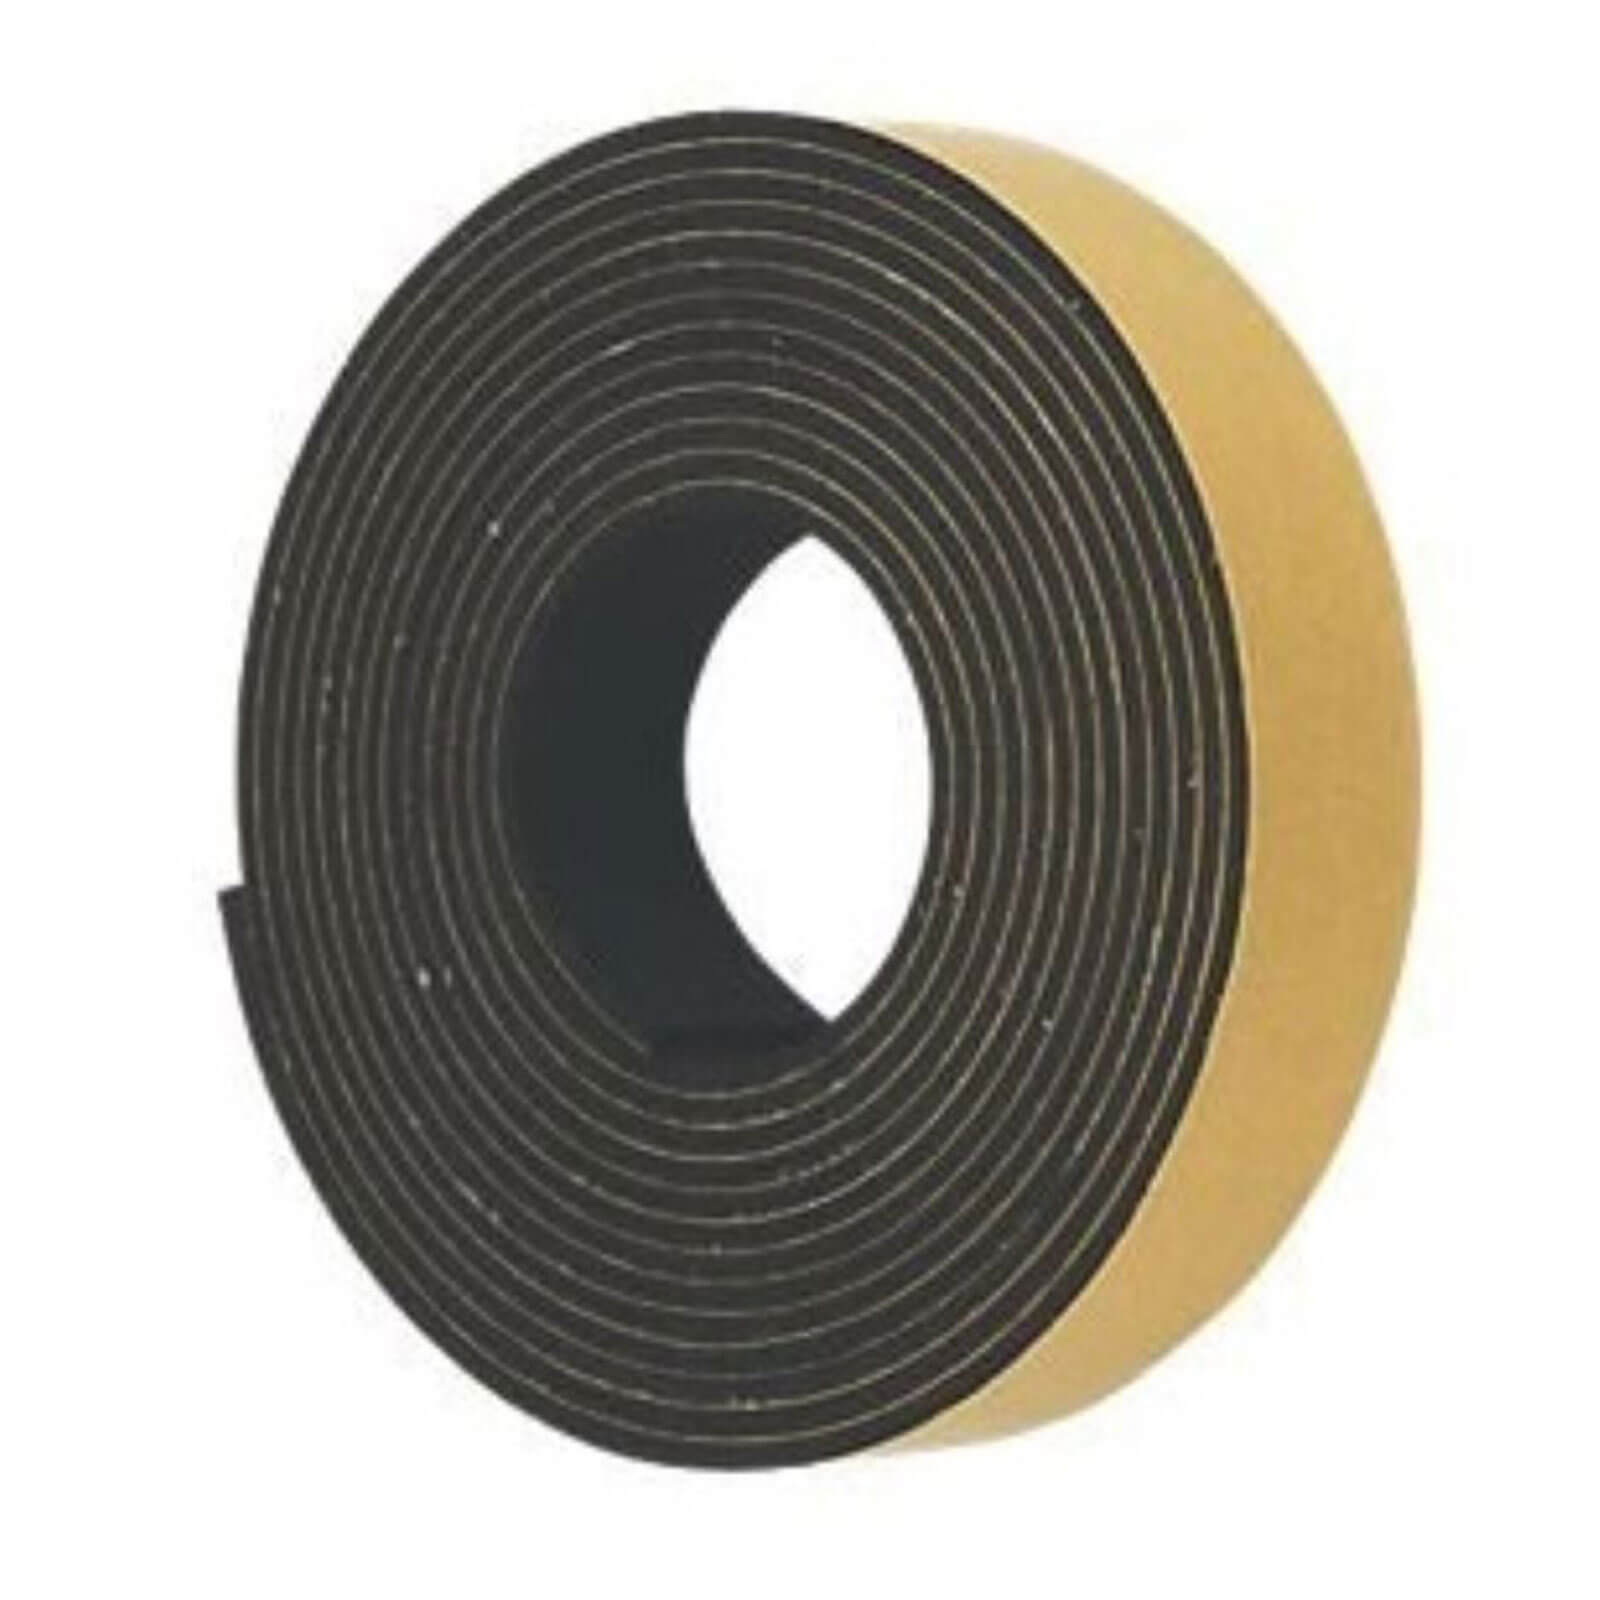 Photo of Dewalt Replacement High Friction Strip For Plunge Saw Guide Rails